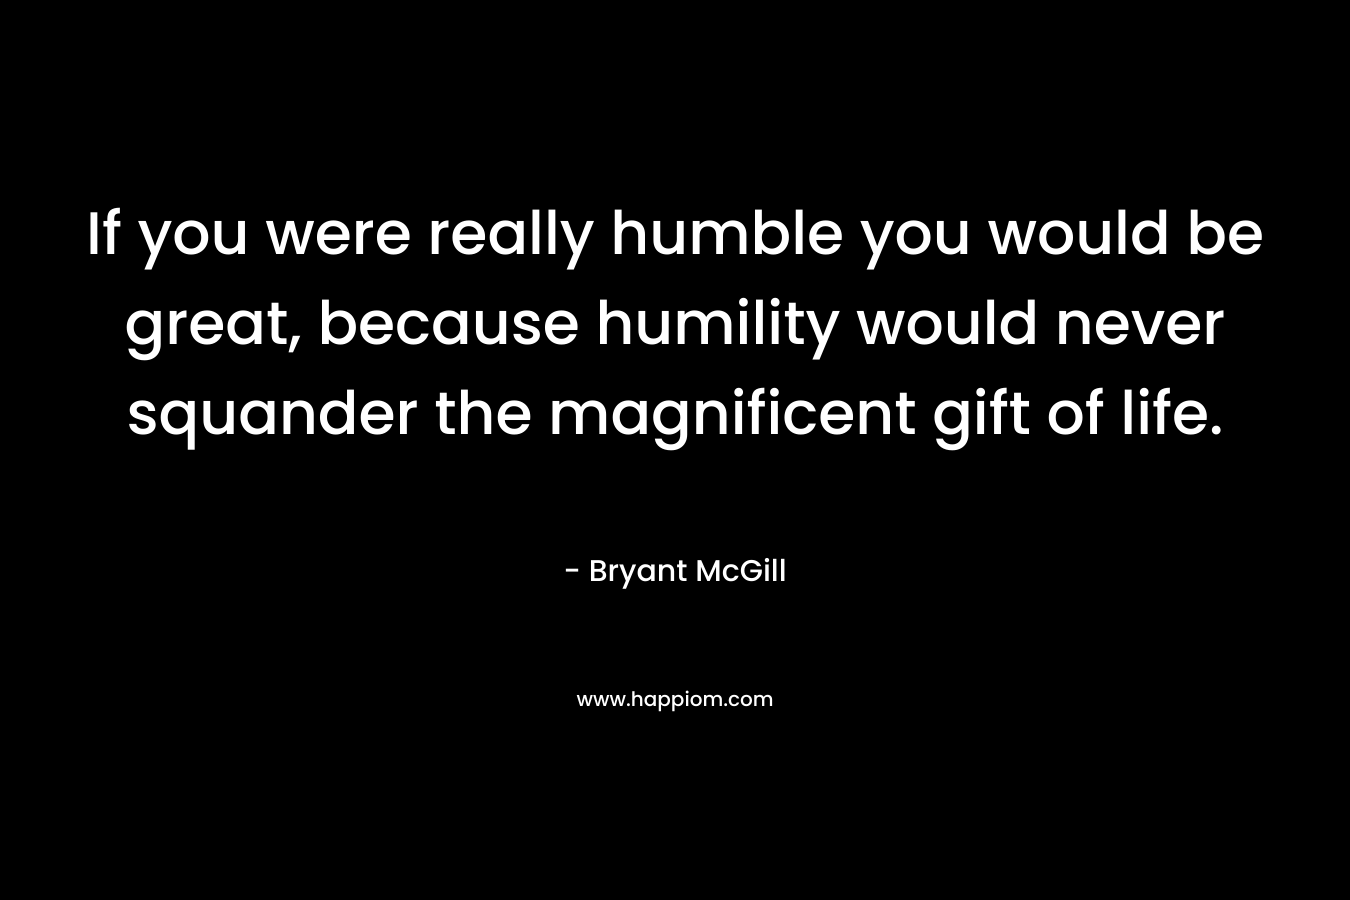 If you were really humble you would be great, because humility would never squander the magnificent gift of life.